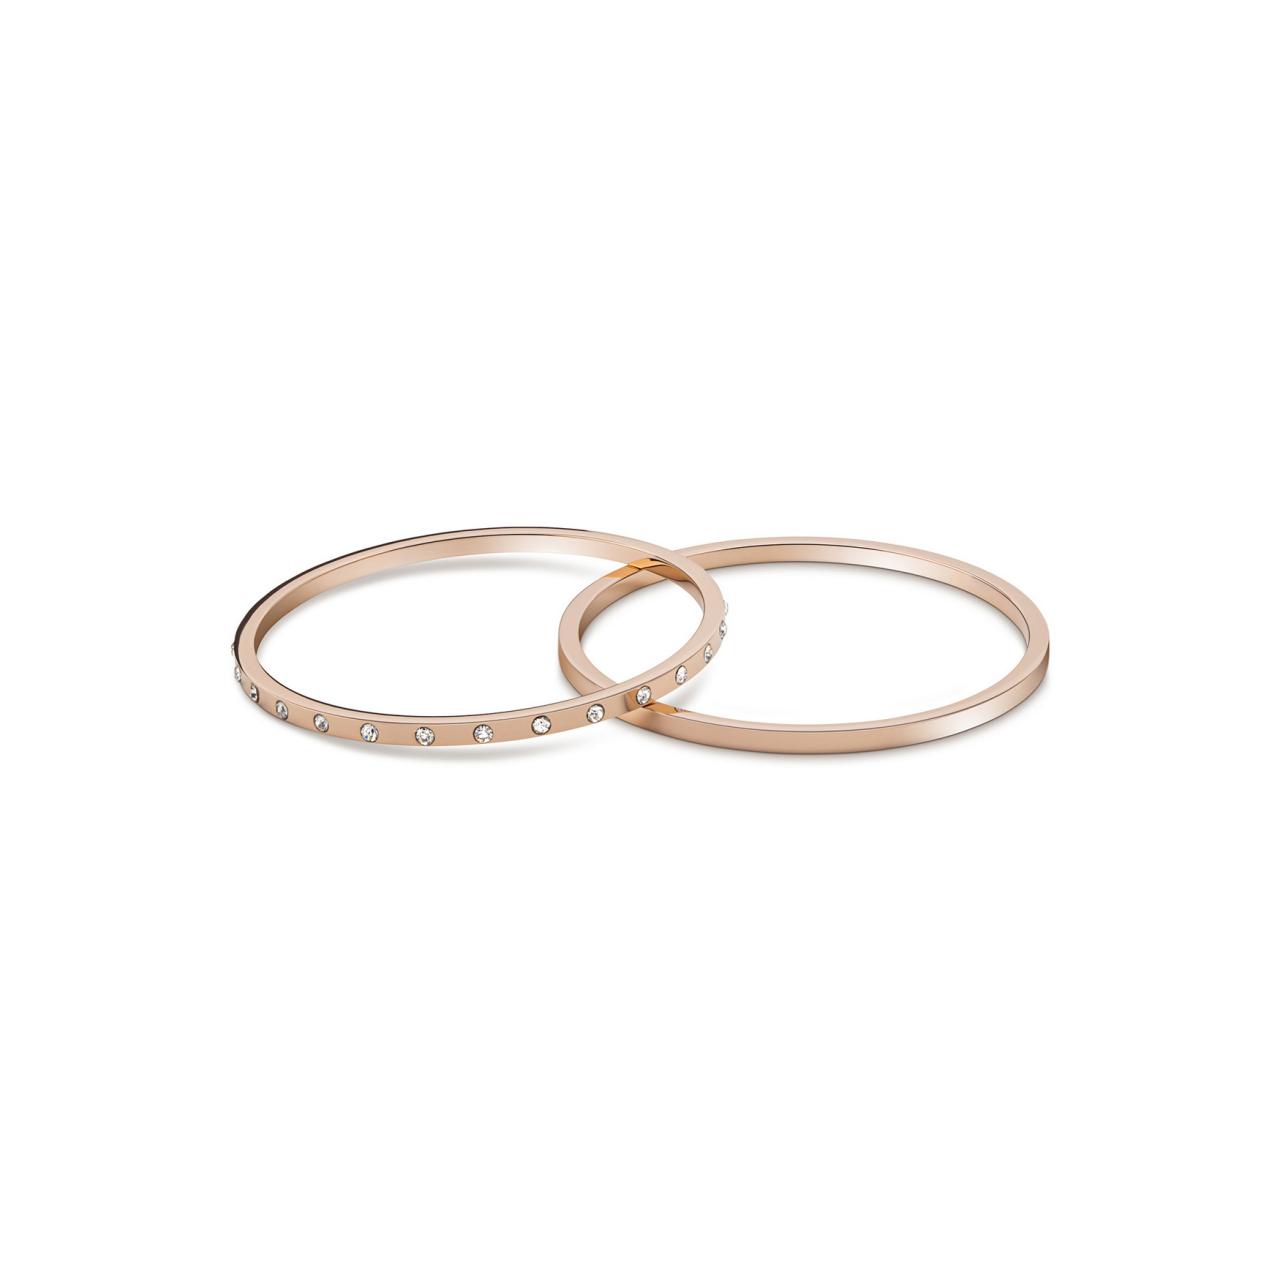 Bangle Bracelets With Inlaid Zircon Set Of 2 For Women, Rose Gold Plated